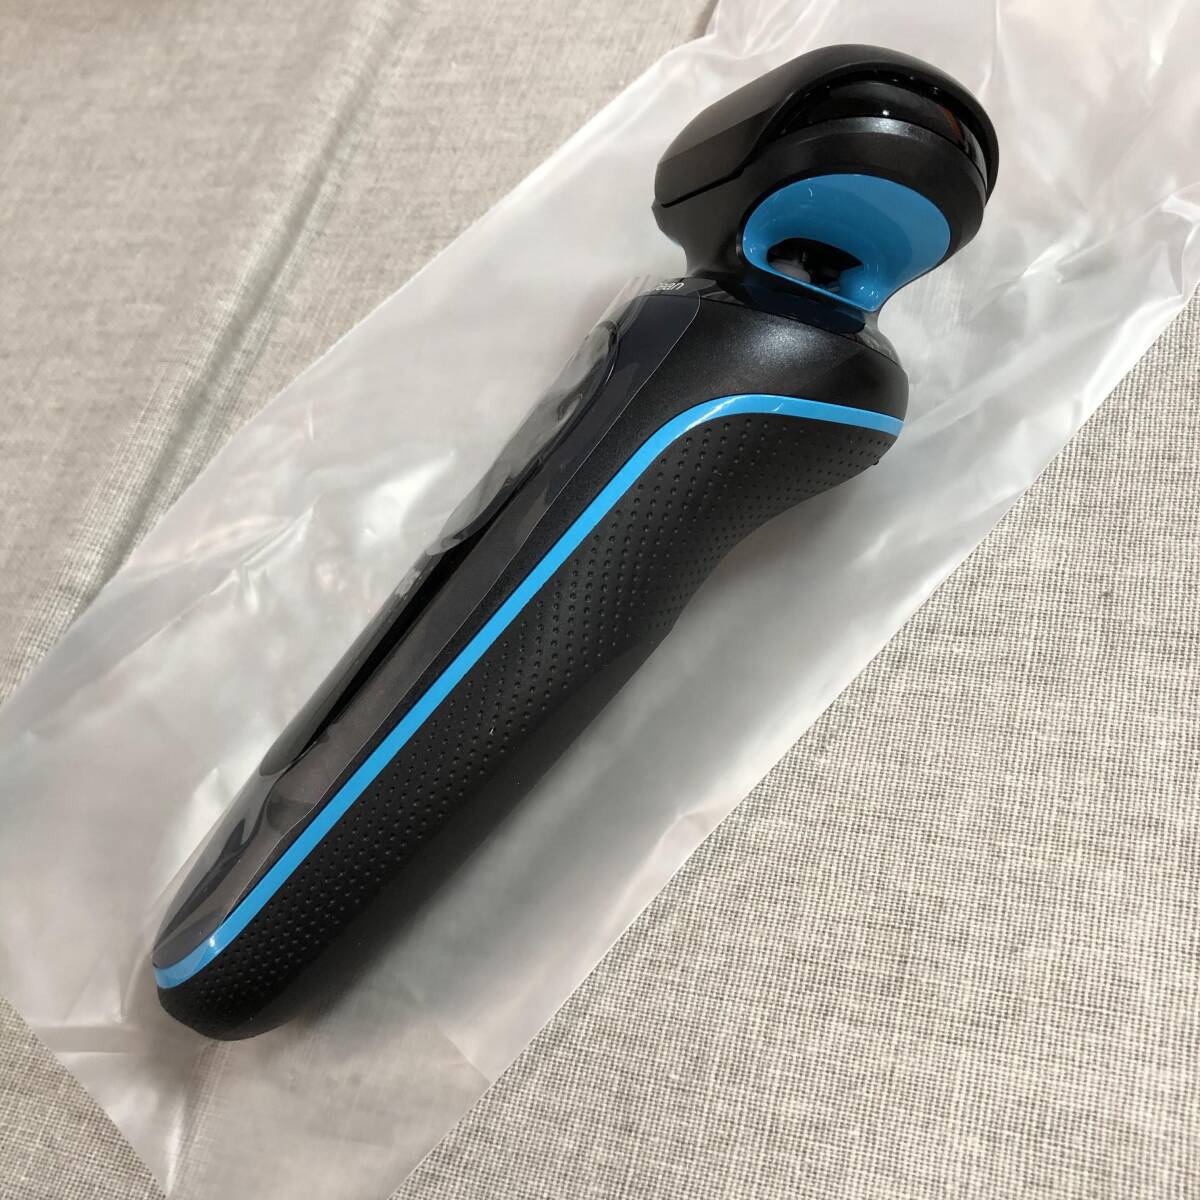  unused Brown series 5 51-M1200s-V electric shaver kiwazoli trimmer waterproof design rechargeable cordless deep catch net blade mint 